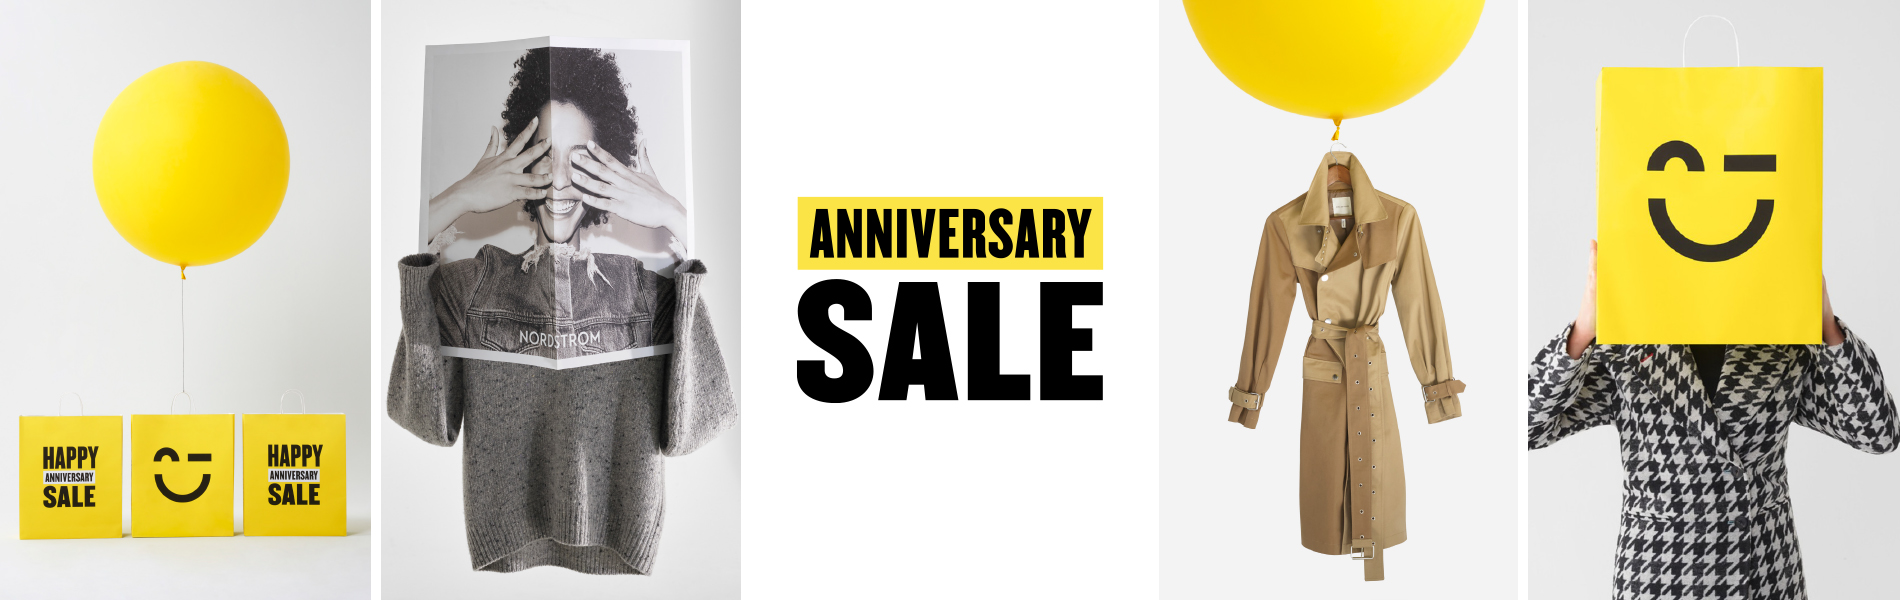 THE NORDSTROM ONE-OF-A-KIND ANNIVERSARY SALE: THE BEST DEALS OF THE YEAR